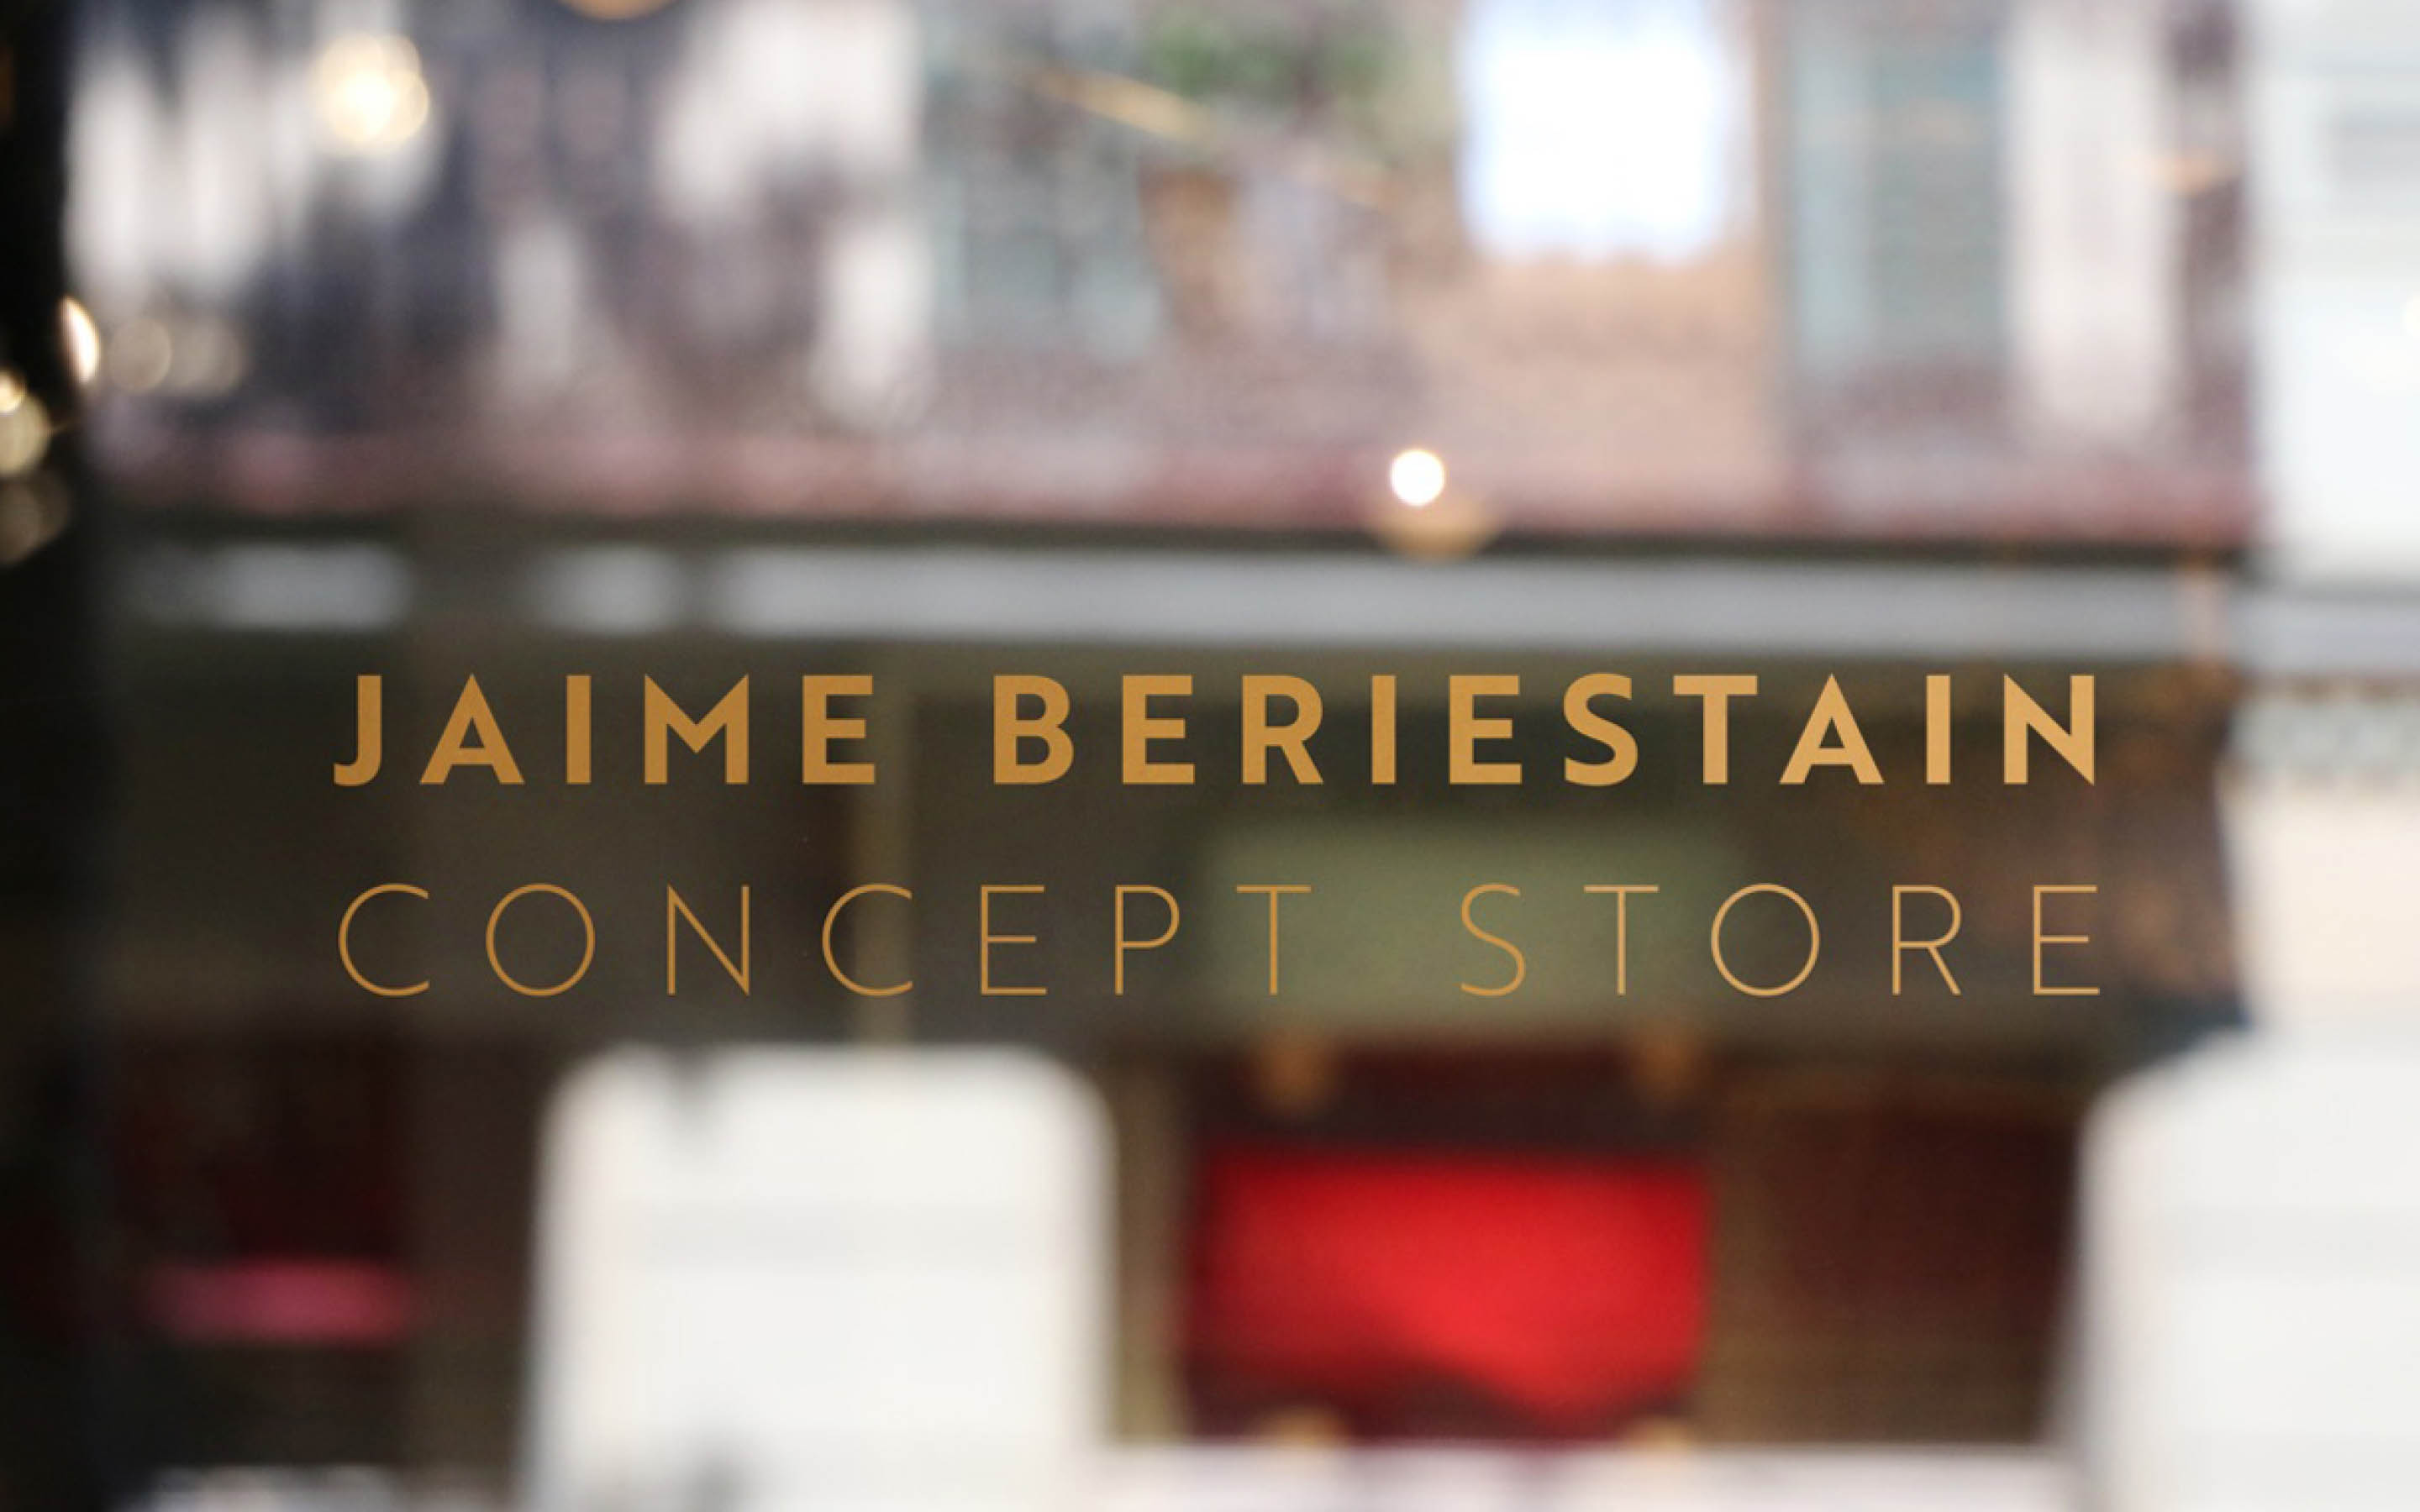 Jaime Beriestain is a famous Chilean interior designer who has not stopped growing since he arrived in Barcelona: he has created his own studio, a showroom next to Gaudí's La Pedrera and two successful ventures: the Concept Store and the Café.
